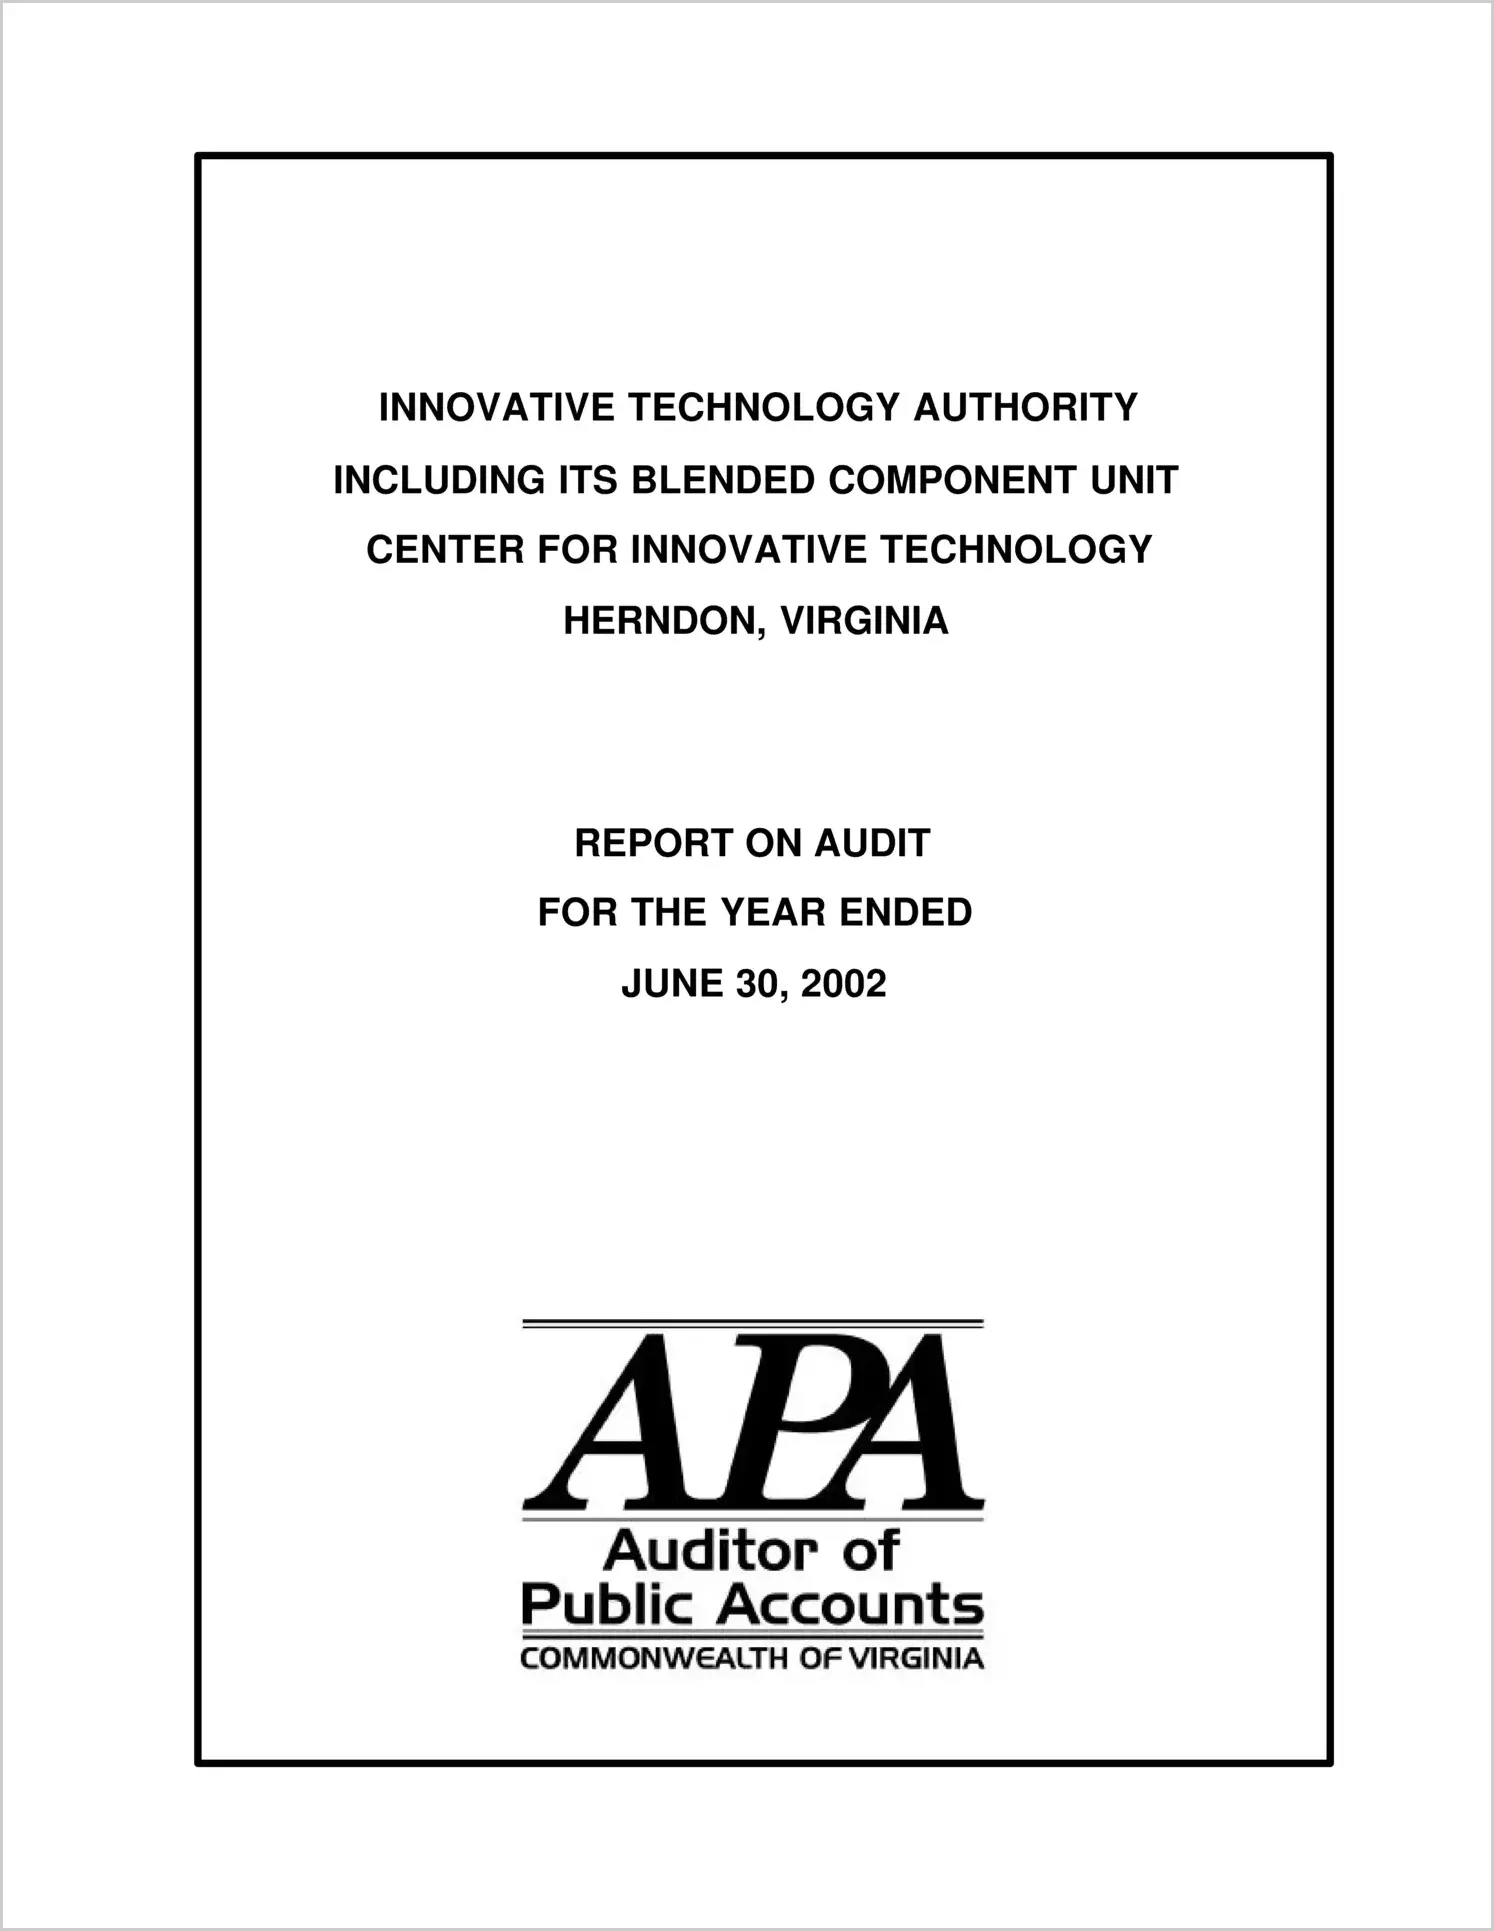 Innovative Technology Authority and the Center for Innovative Technology for the year ended June 30, 2002